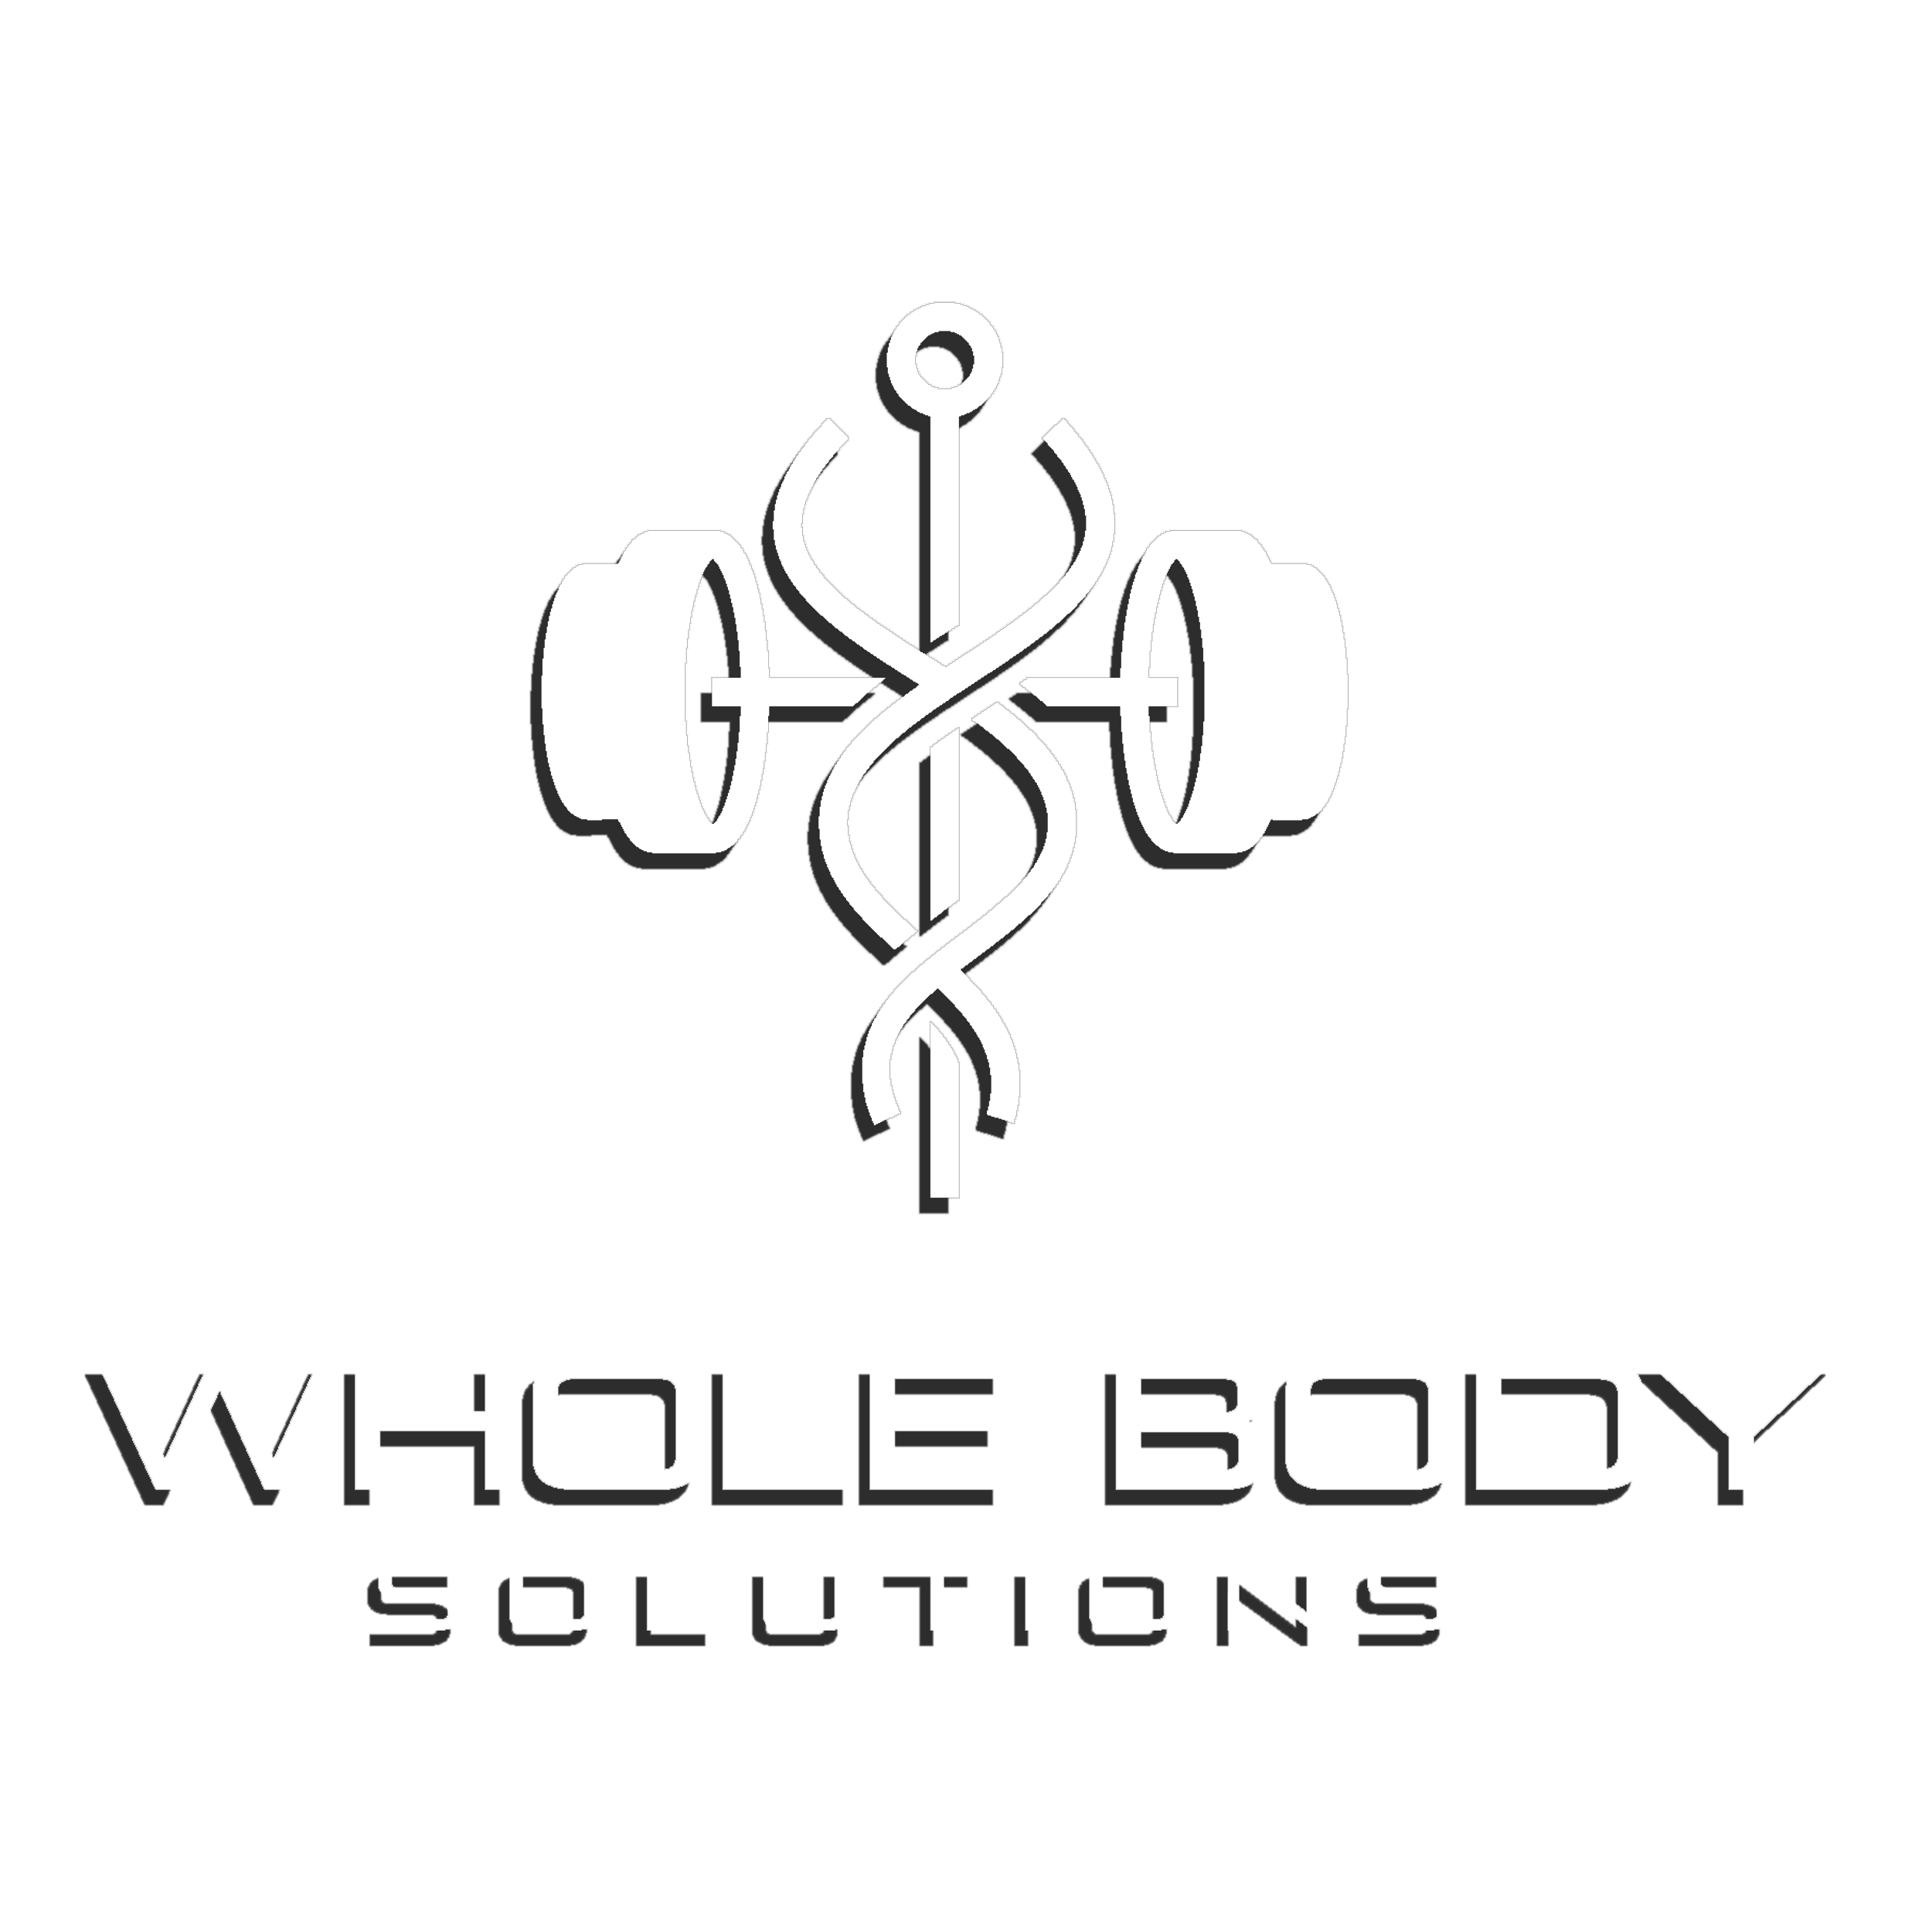 Whole Body Solutions